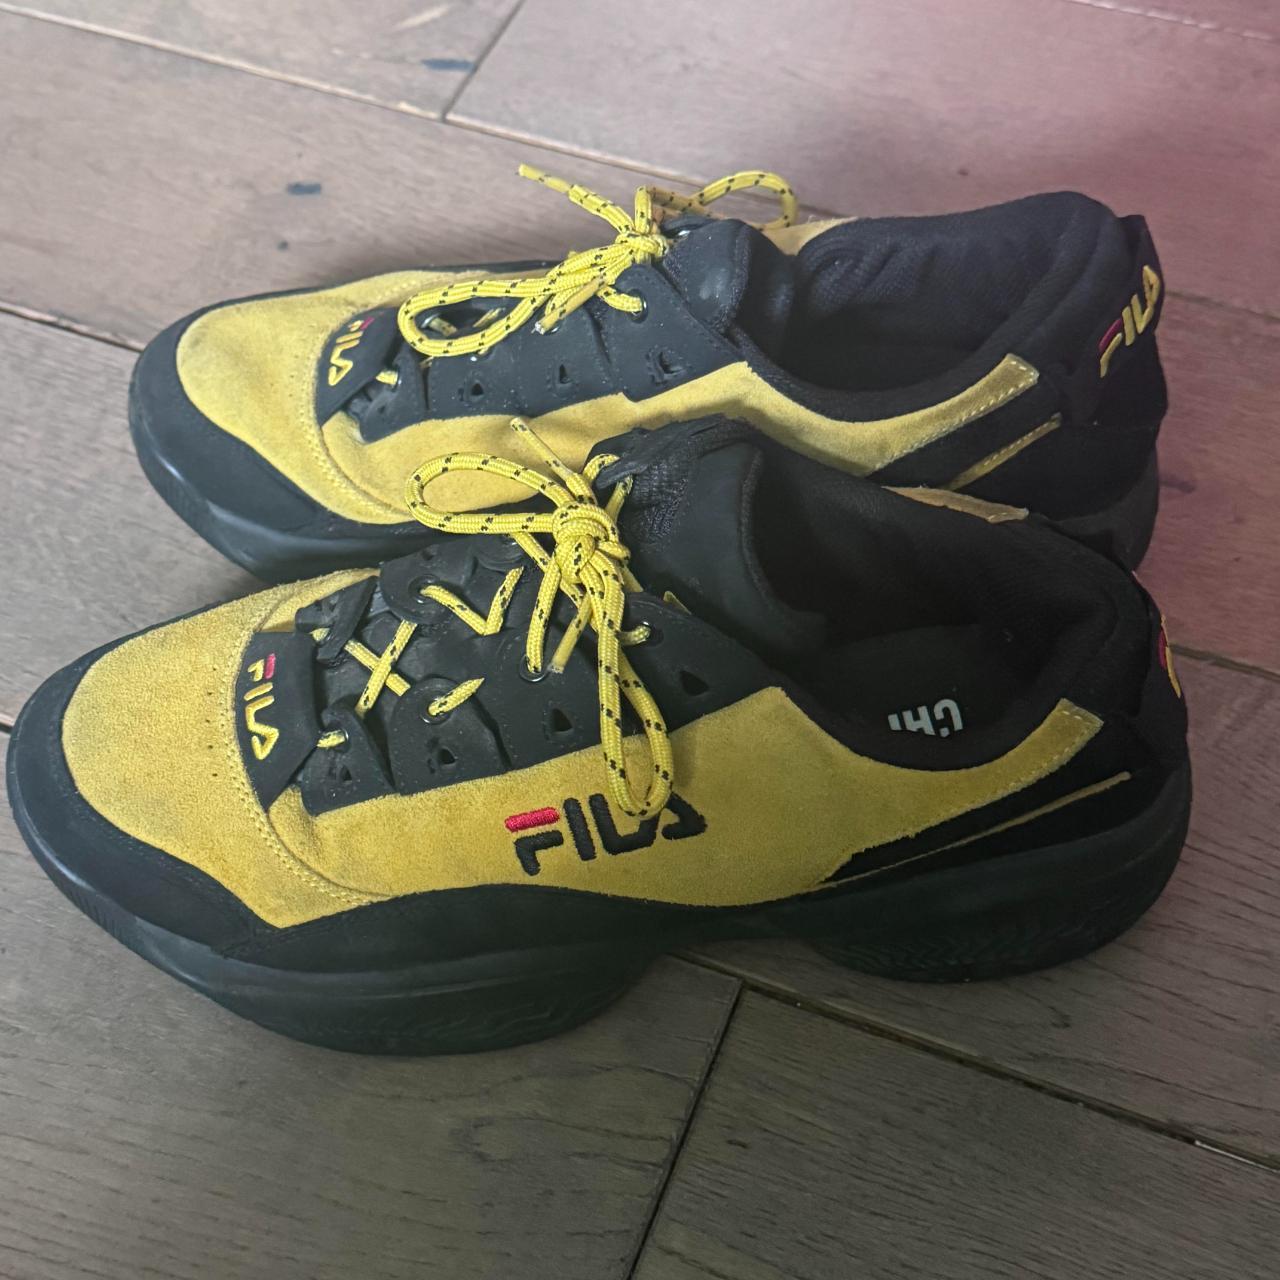 New with tags NWT Fila Sport Black neon multicolor - Depop